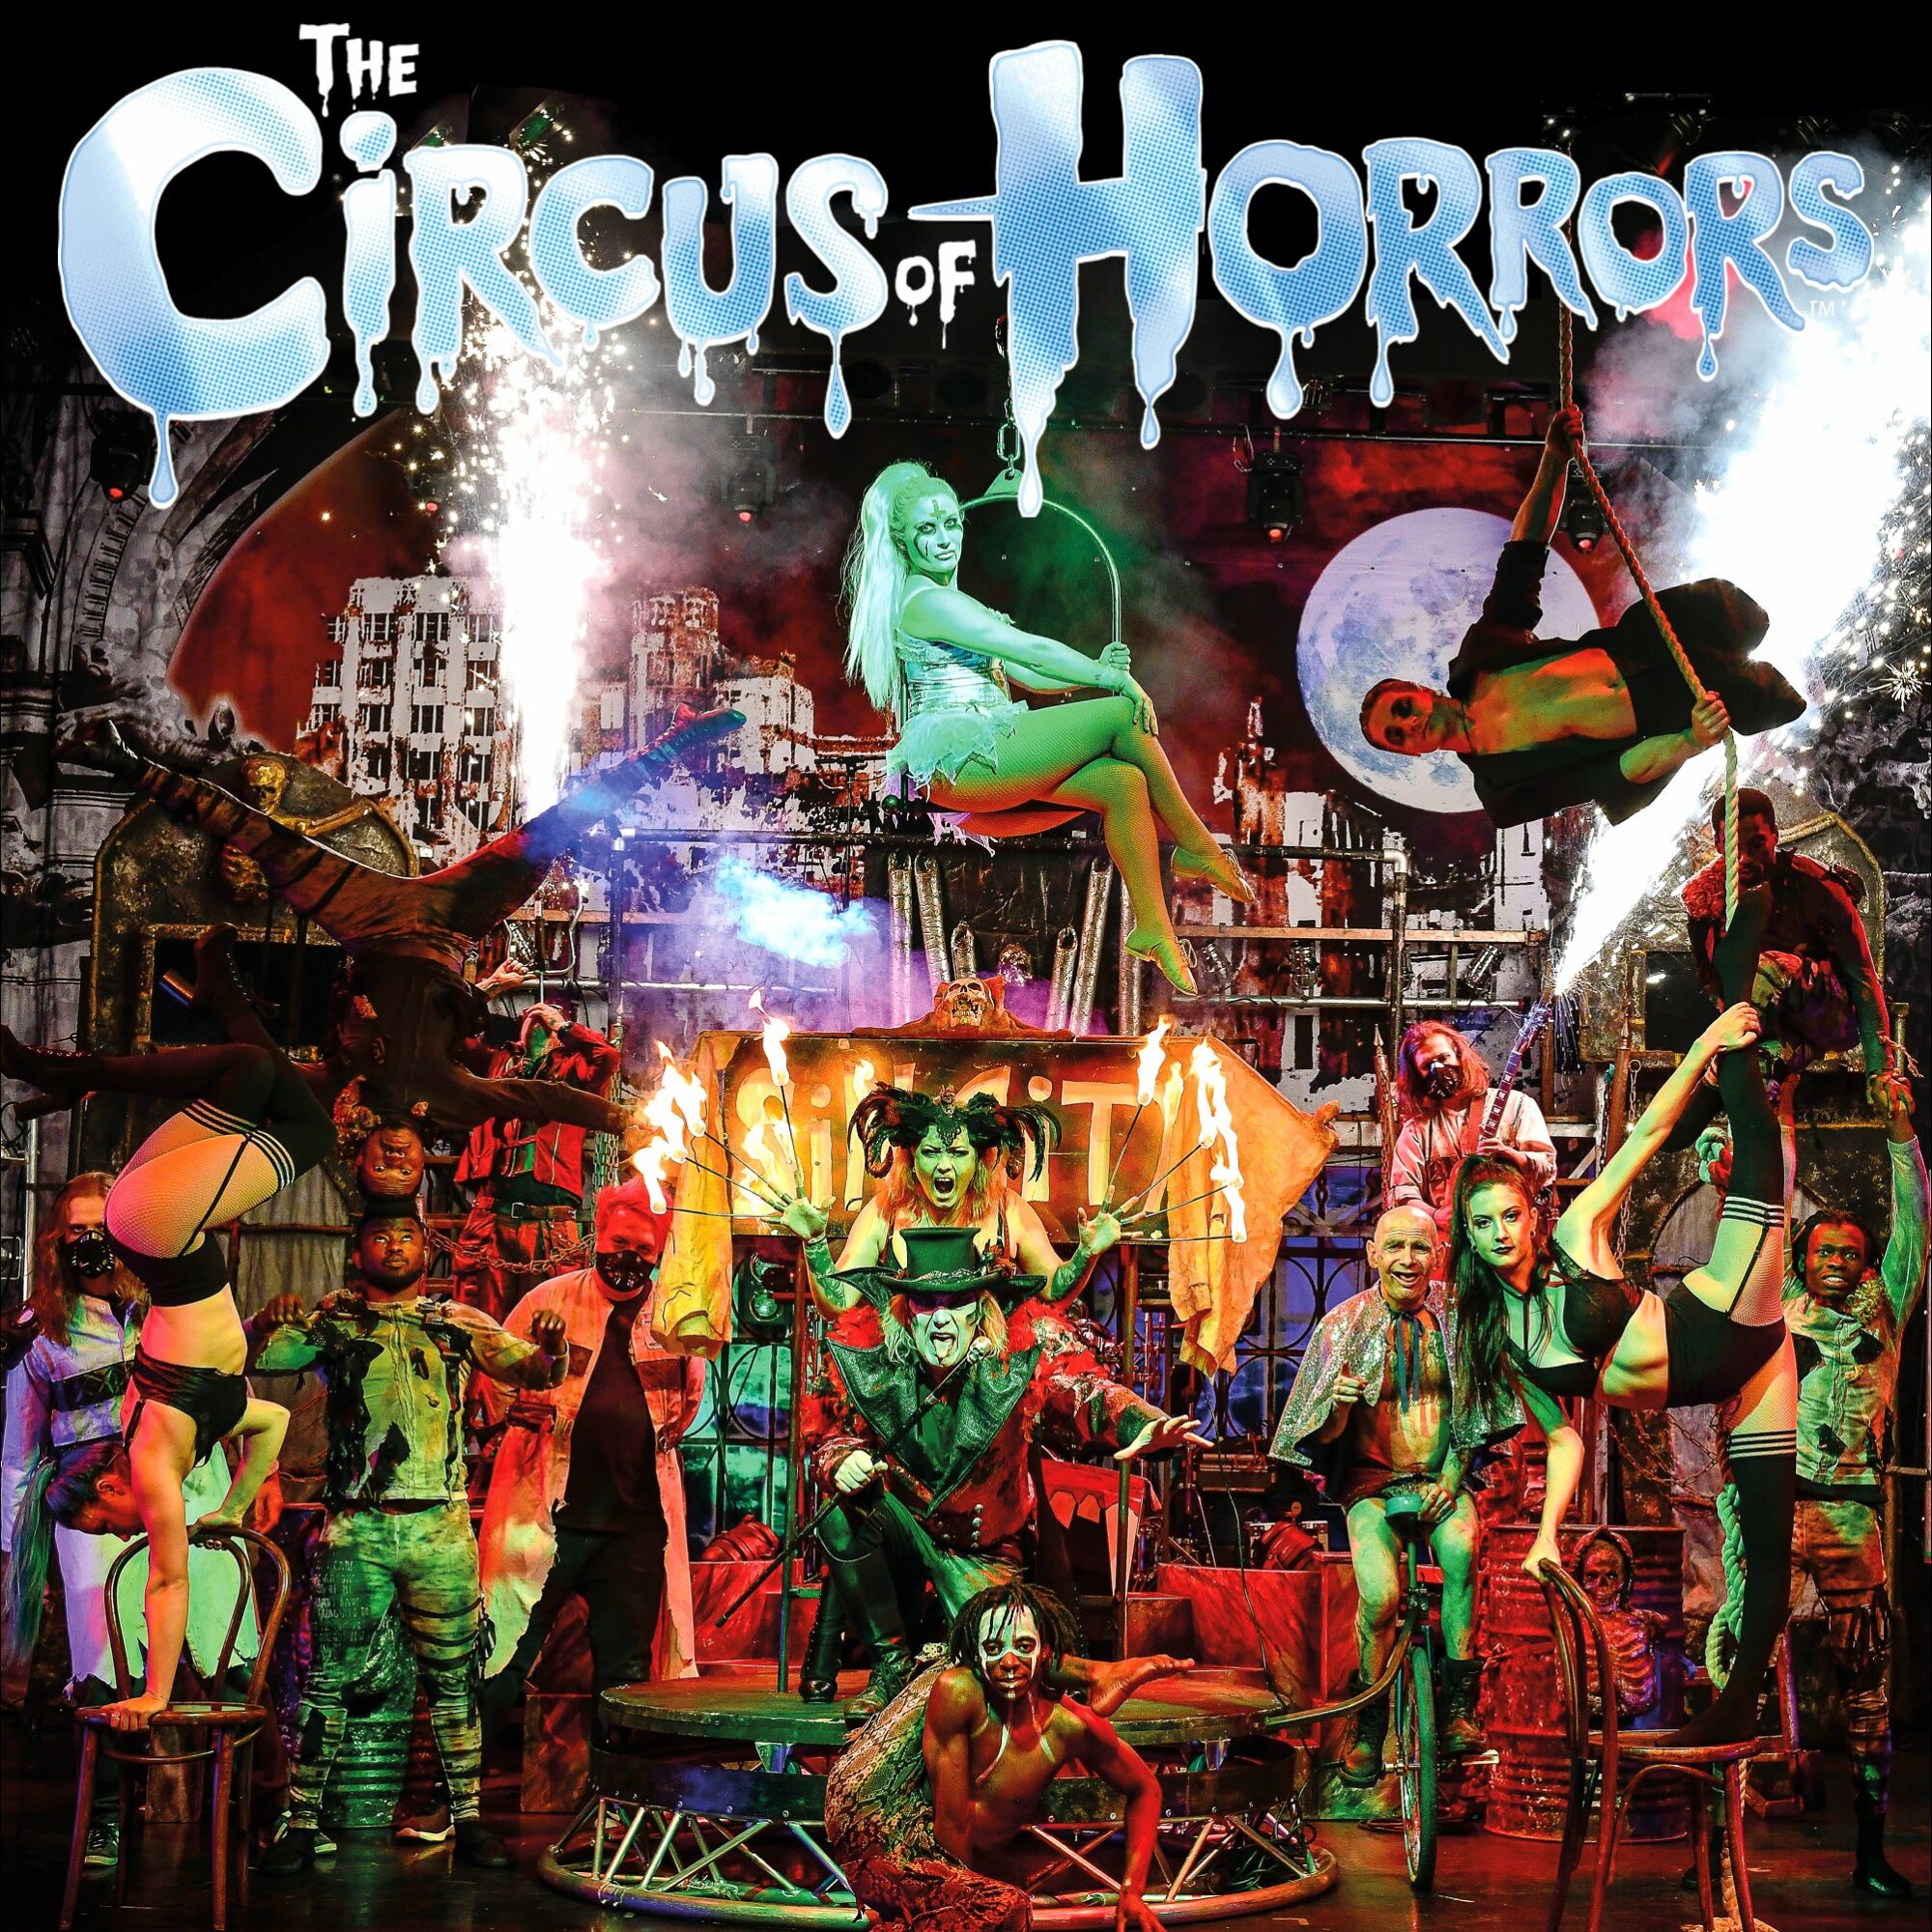 Image name Circus of Horrors at Connexin Live Hull the 1 image from the post Circus of Horrors at Connexin Live, Hull in Yorkshire.com.